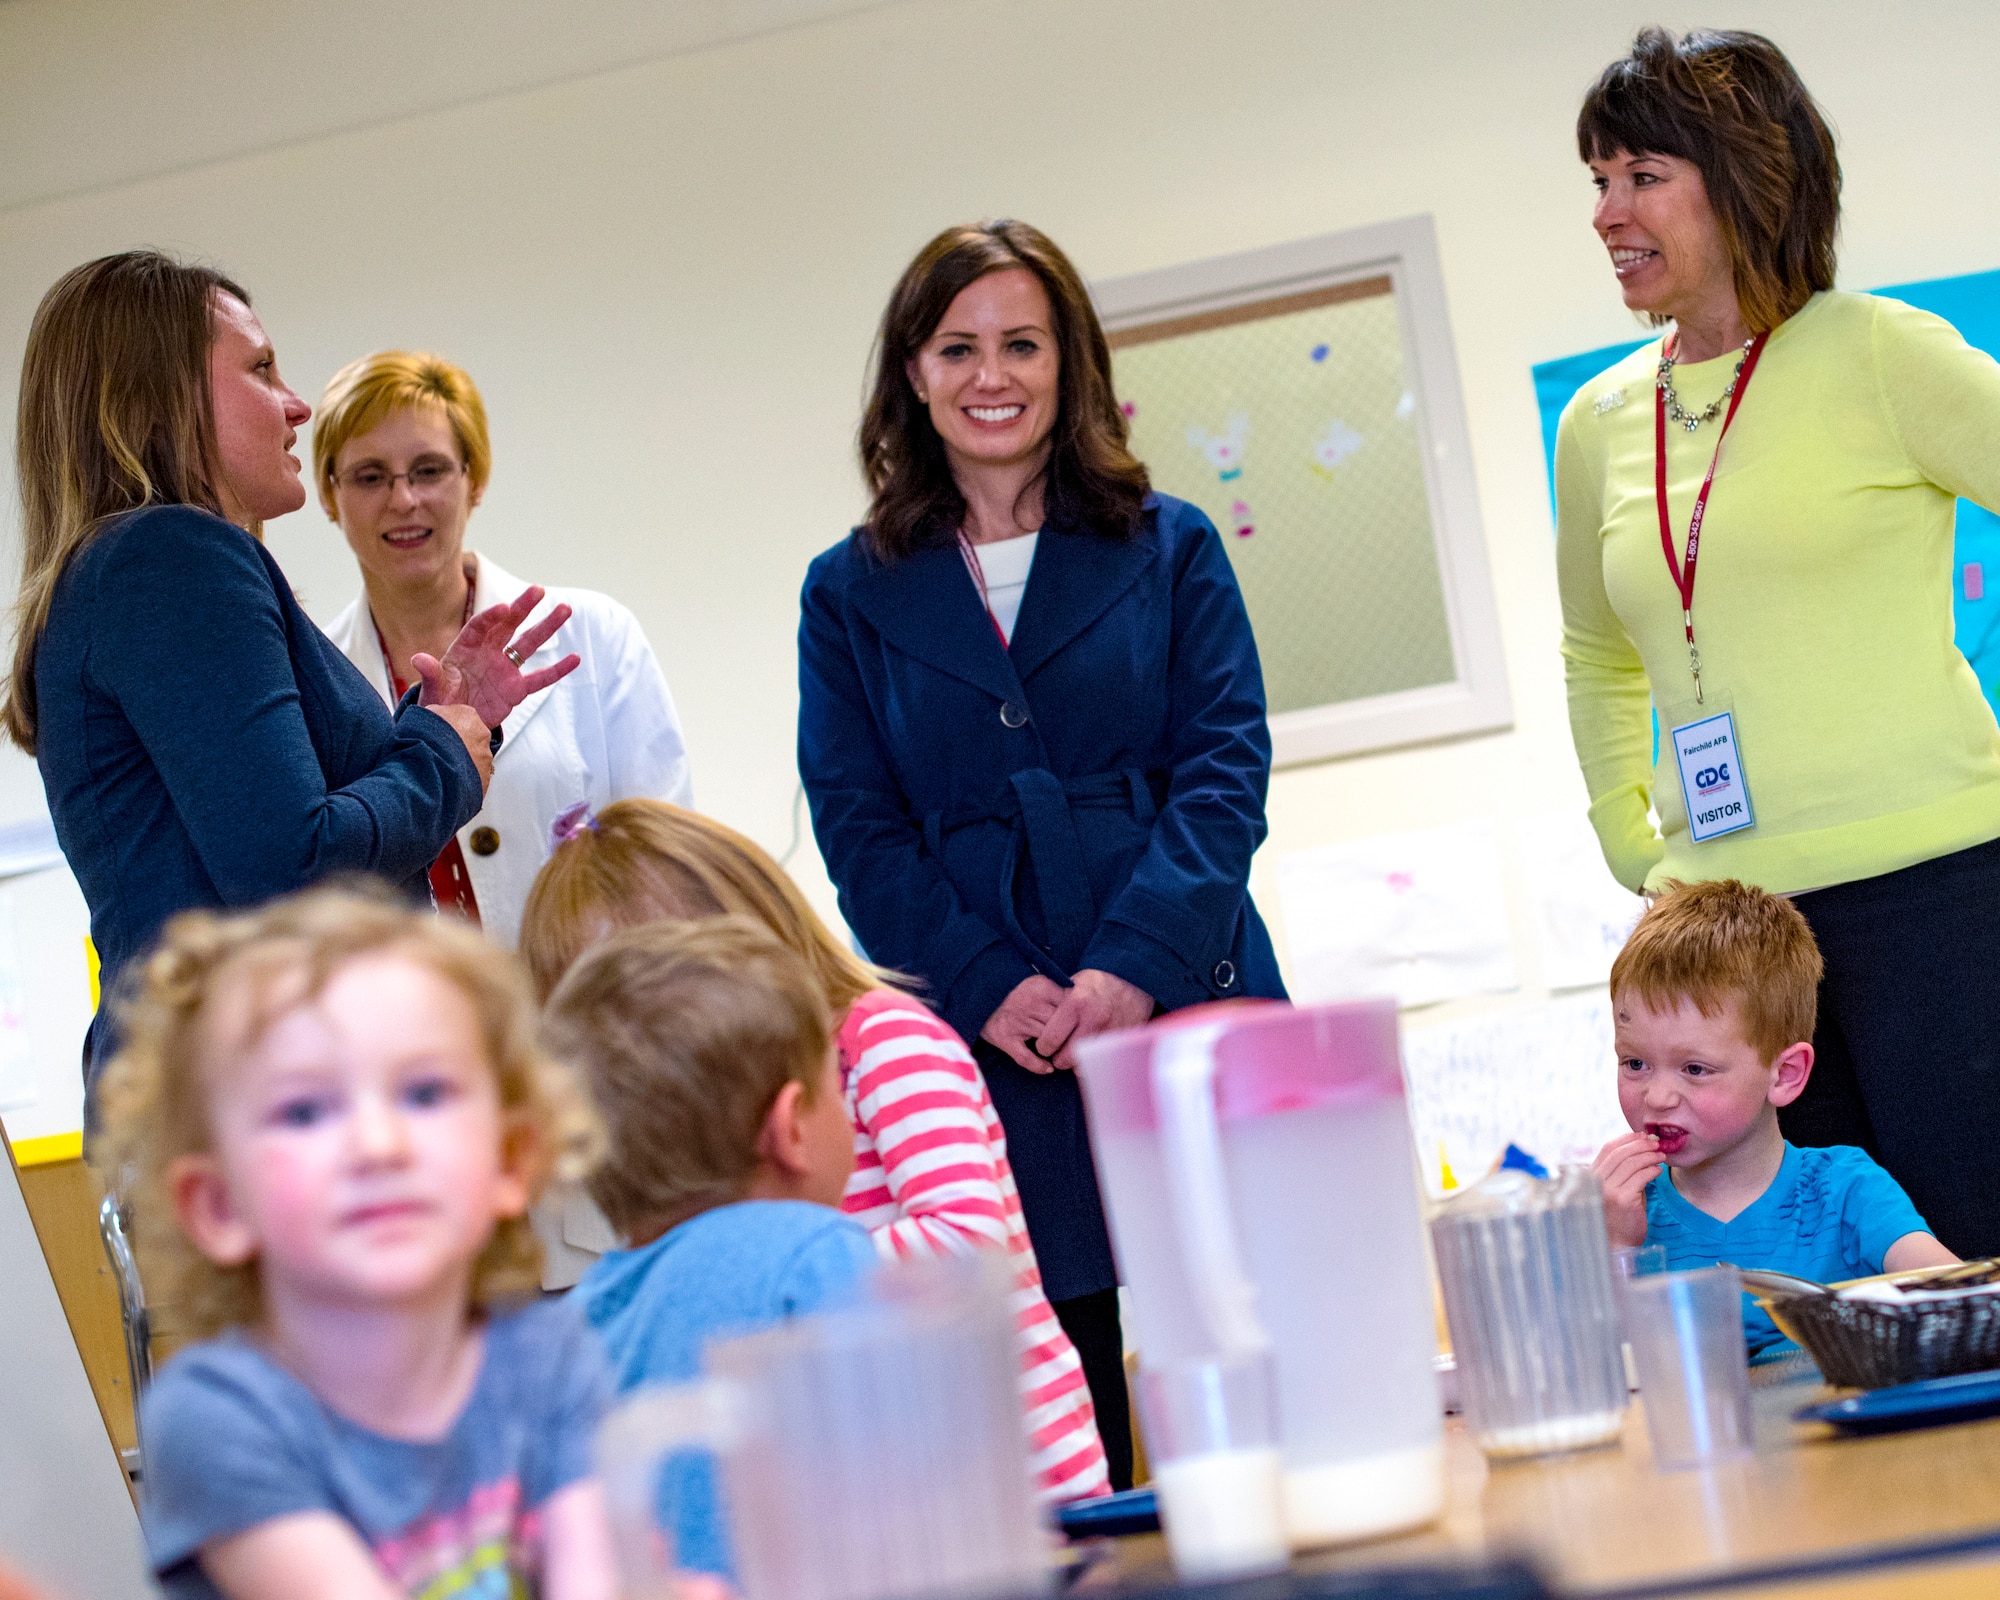 (From right to left) Kelly Barrett, 18th Air Force commander spouse, Kris Salmi, 92nd Air Refueling Wing commander spouse, and Mary Heathman, 92nd ARW vice commander spouse, visit with a Child Development Center class at Fairchild Air Force Base, Washington, May 21, 2019. Barrett toured the CDC and other family quality-of-life providers throughout her visit. (U.S. Air Force photo by Airman 1st Class Whitney Laine)